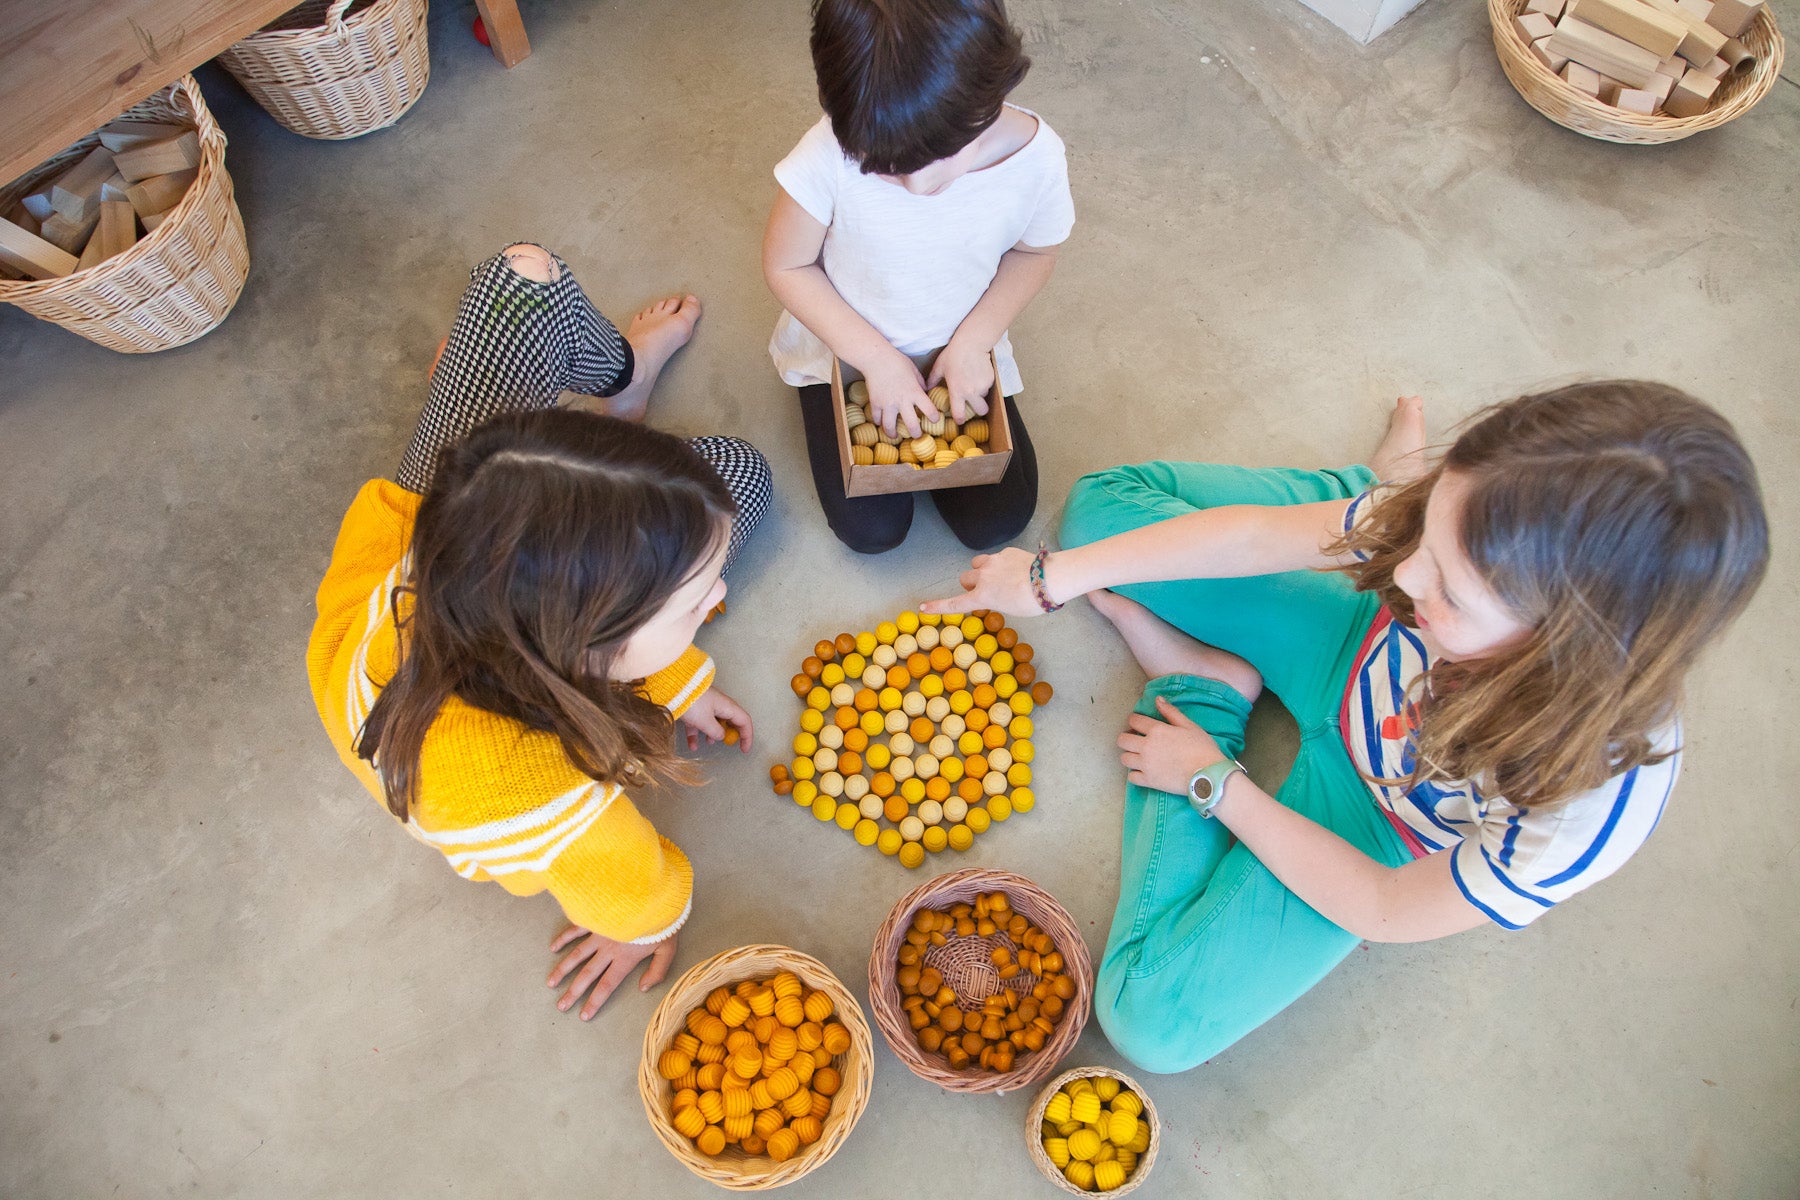 Kids playing with honeycomb and mushroom mandalas in straw baskets